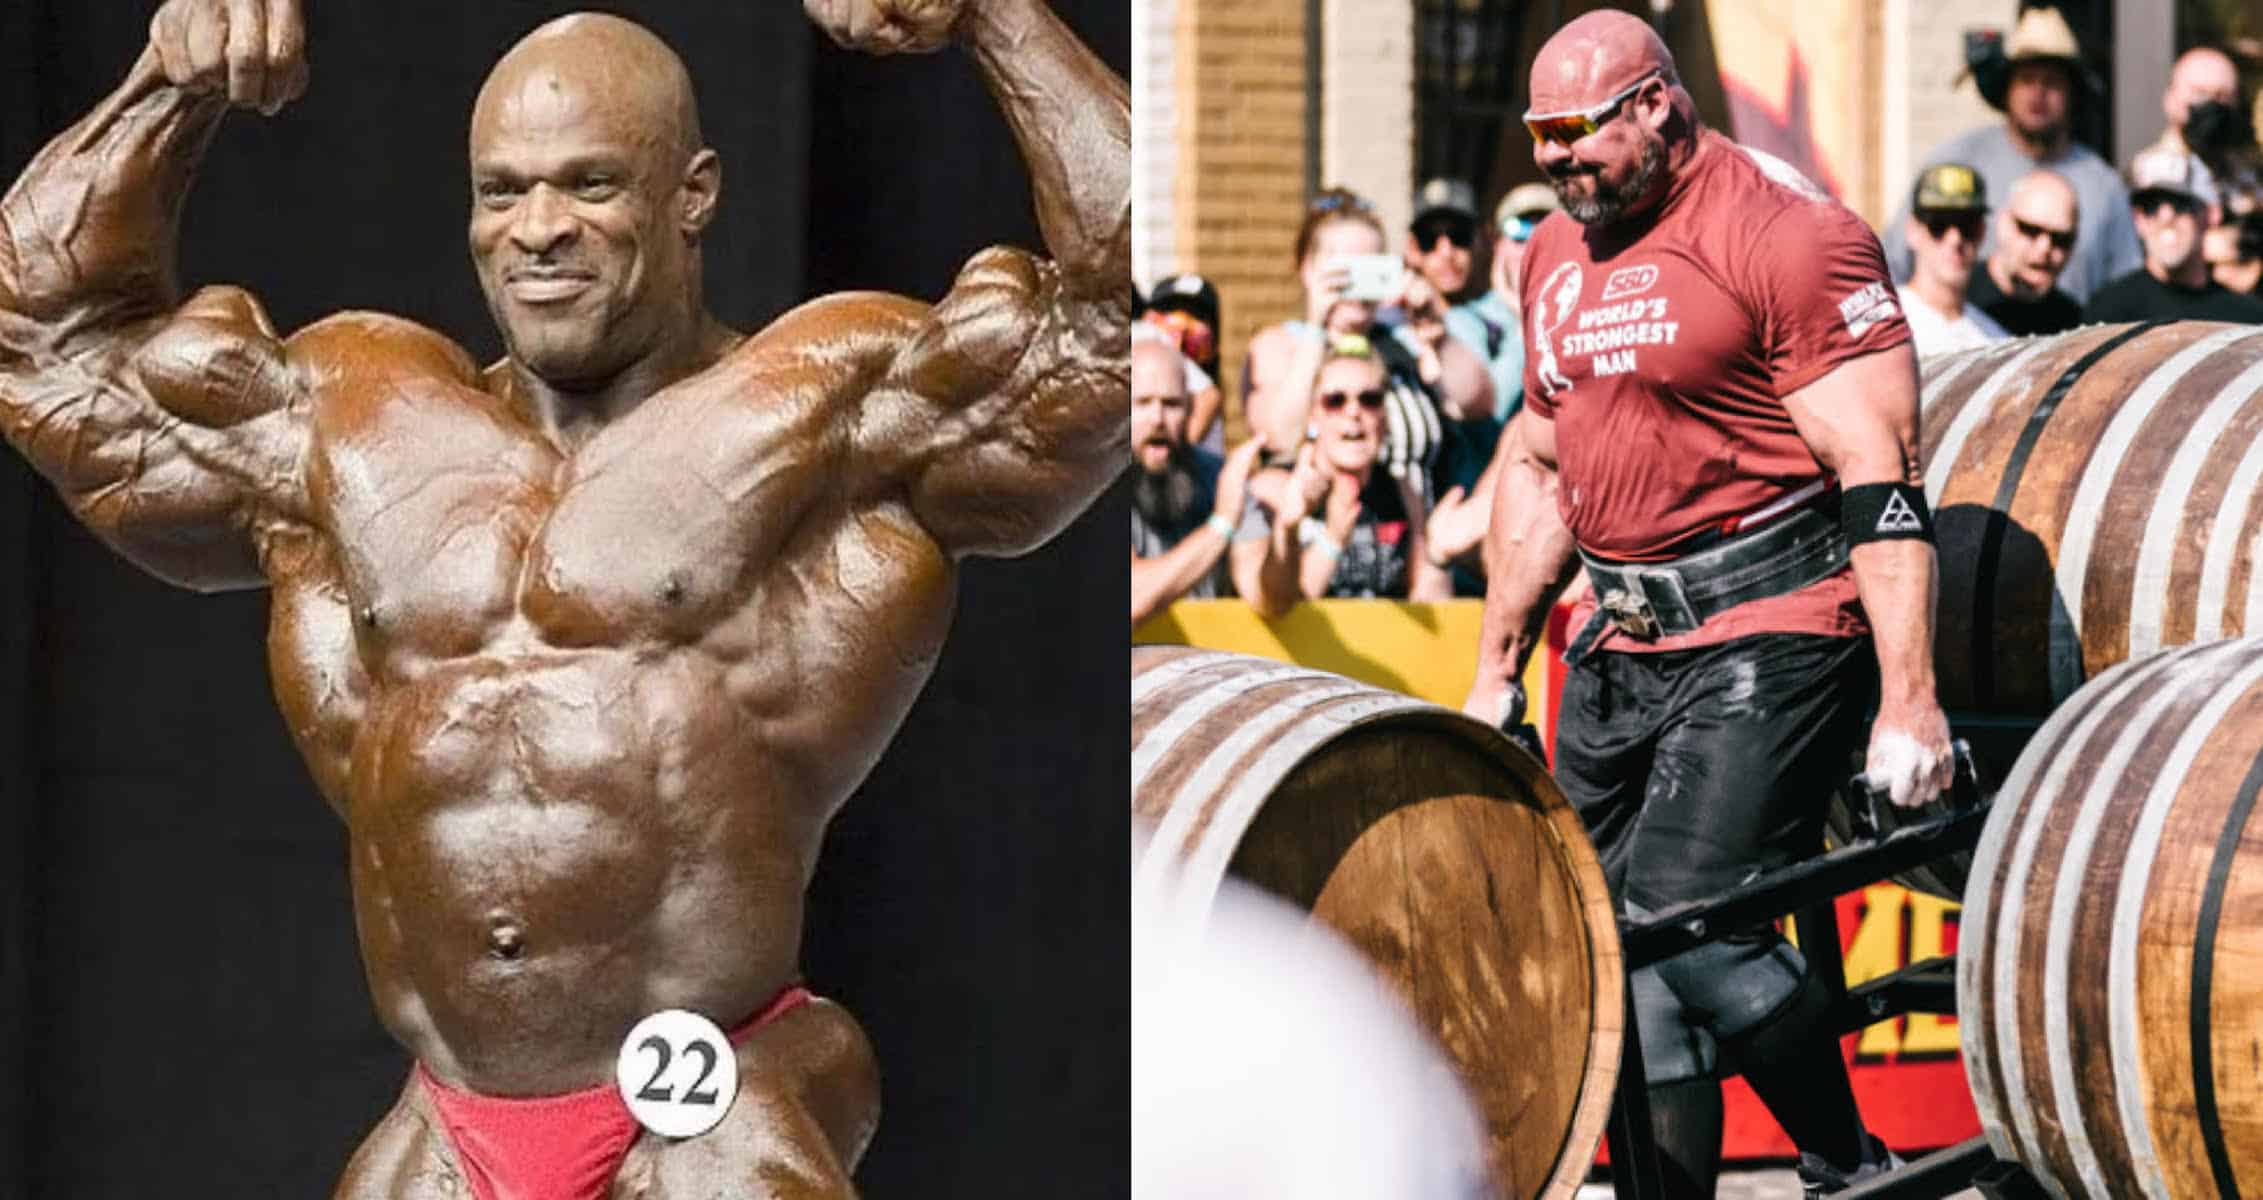 10 Training Tips From the Legendary Ronnie Coleman - Muscle & Fitness